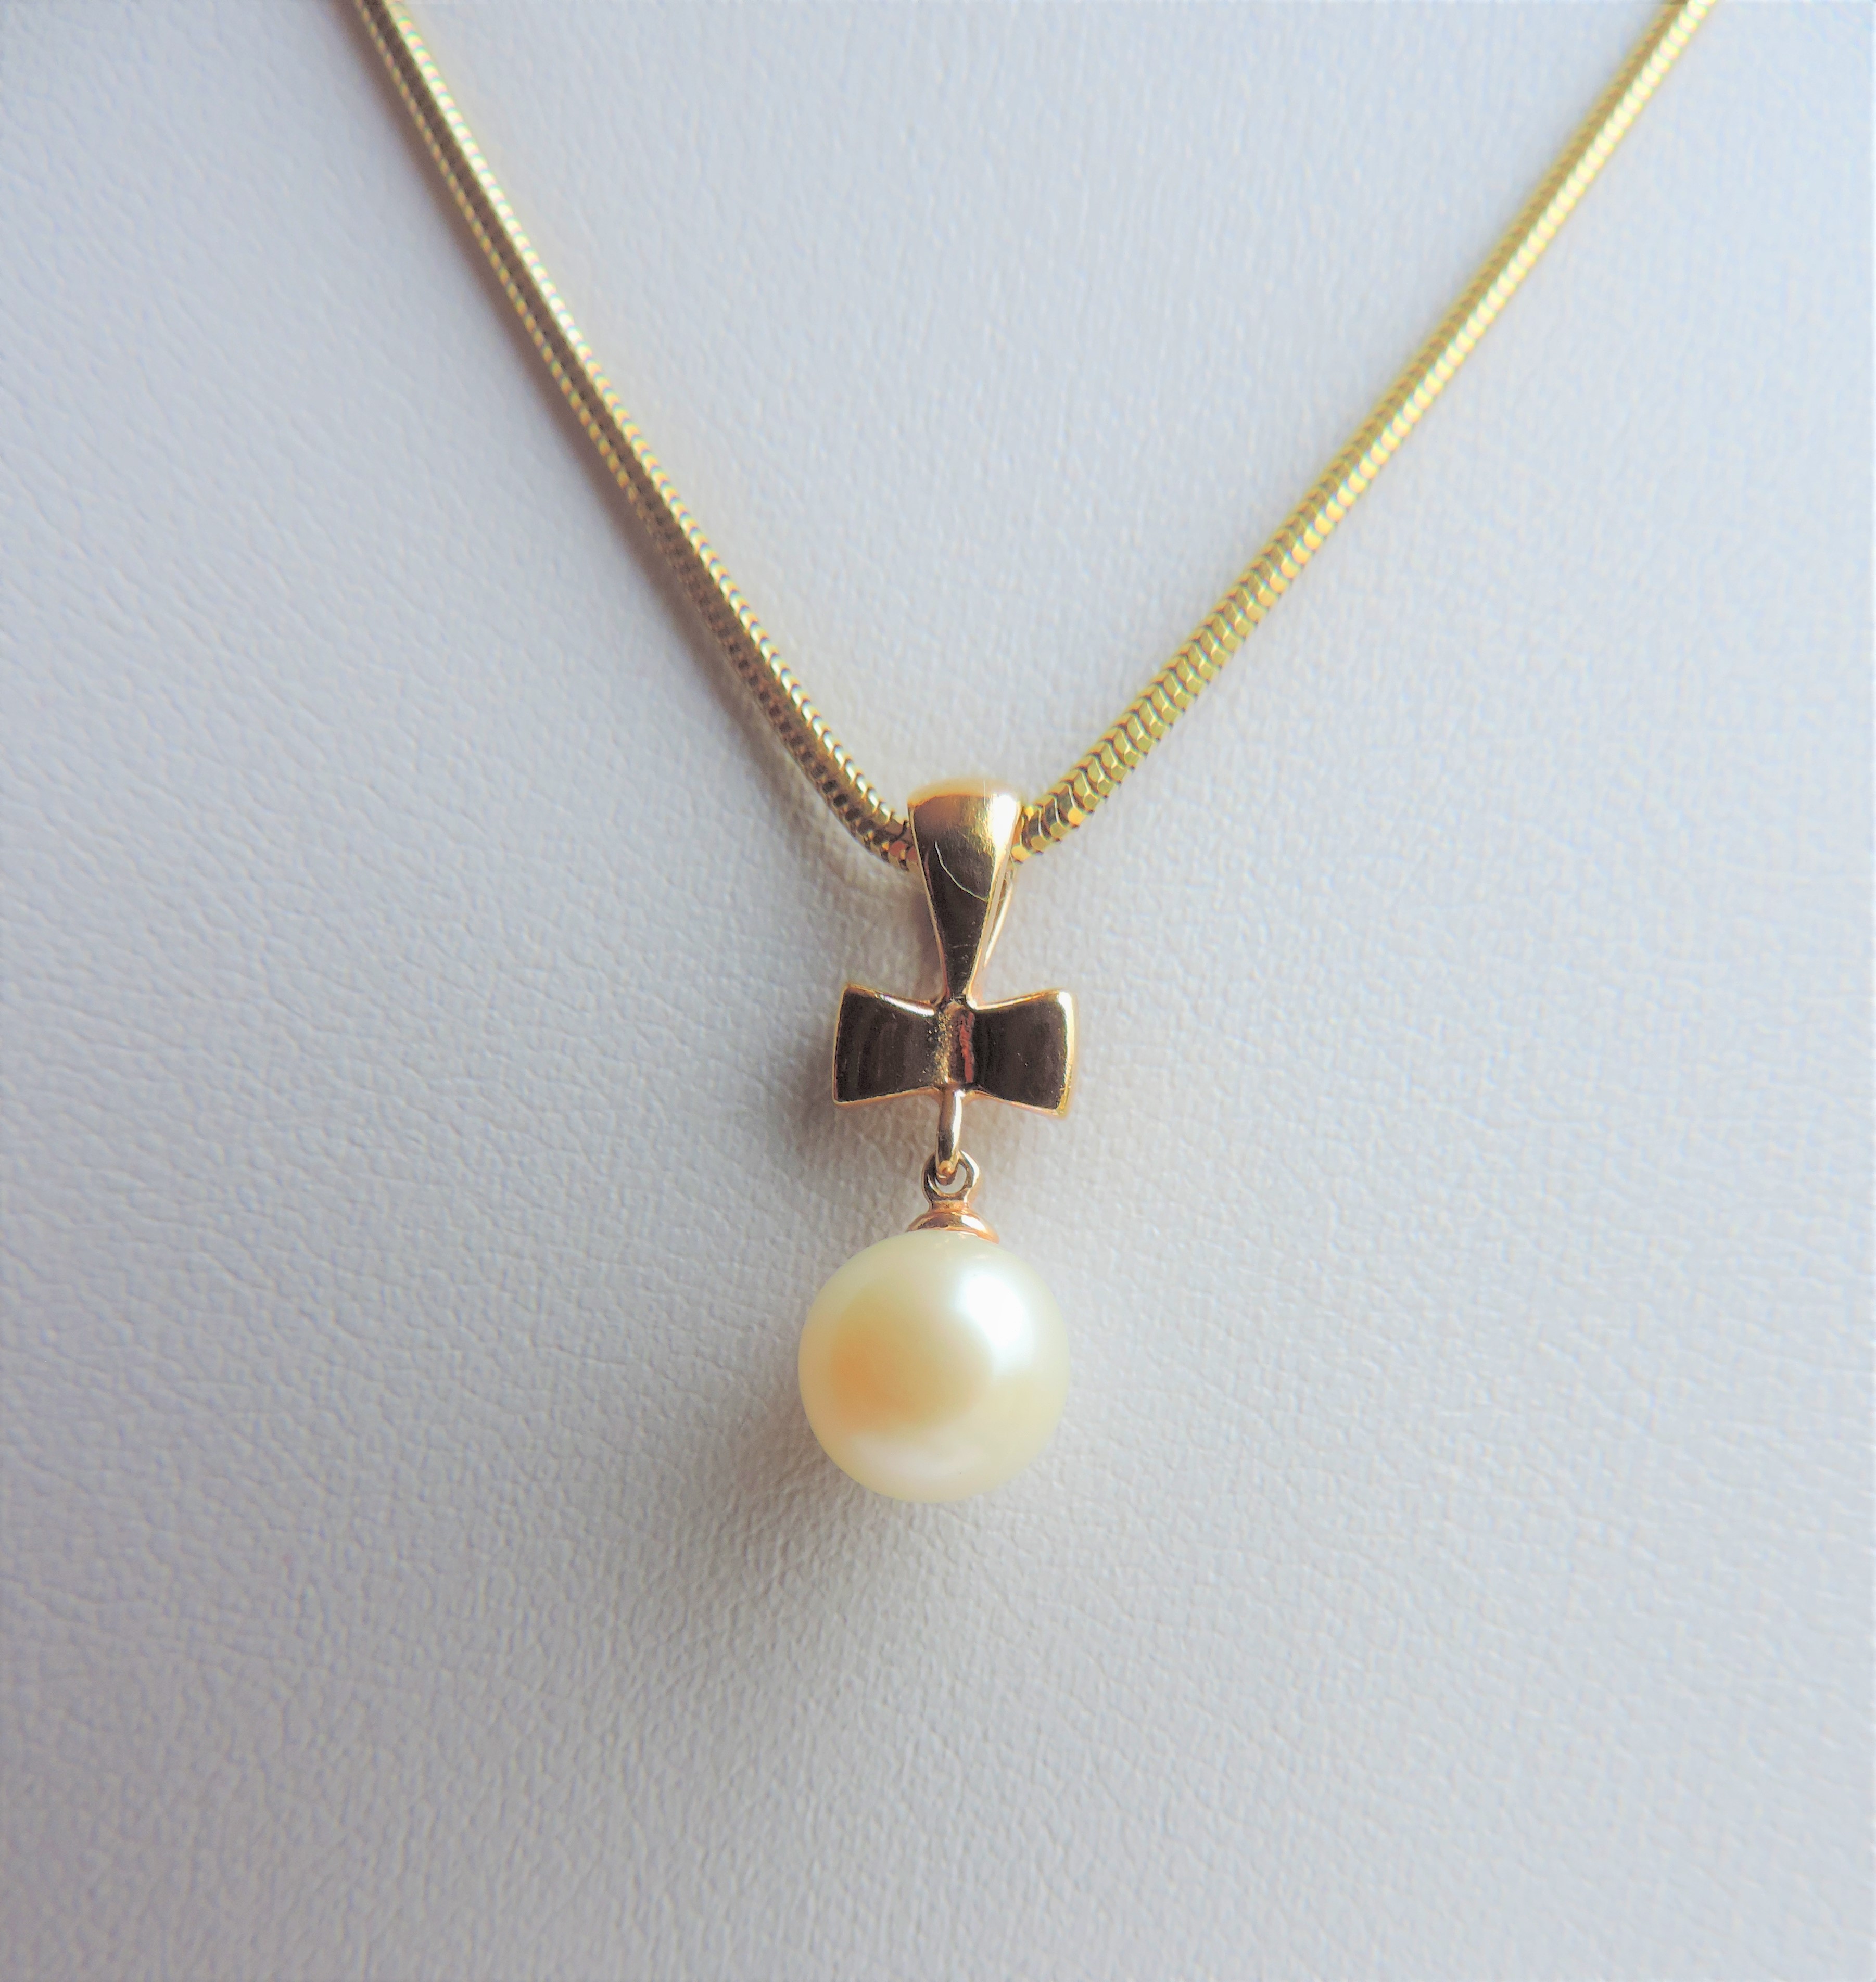 Gold on Sterling Silver Cultured Pearl Pendant Necklace - Image 2 of 2